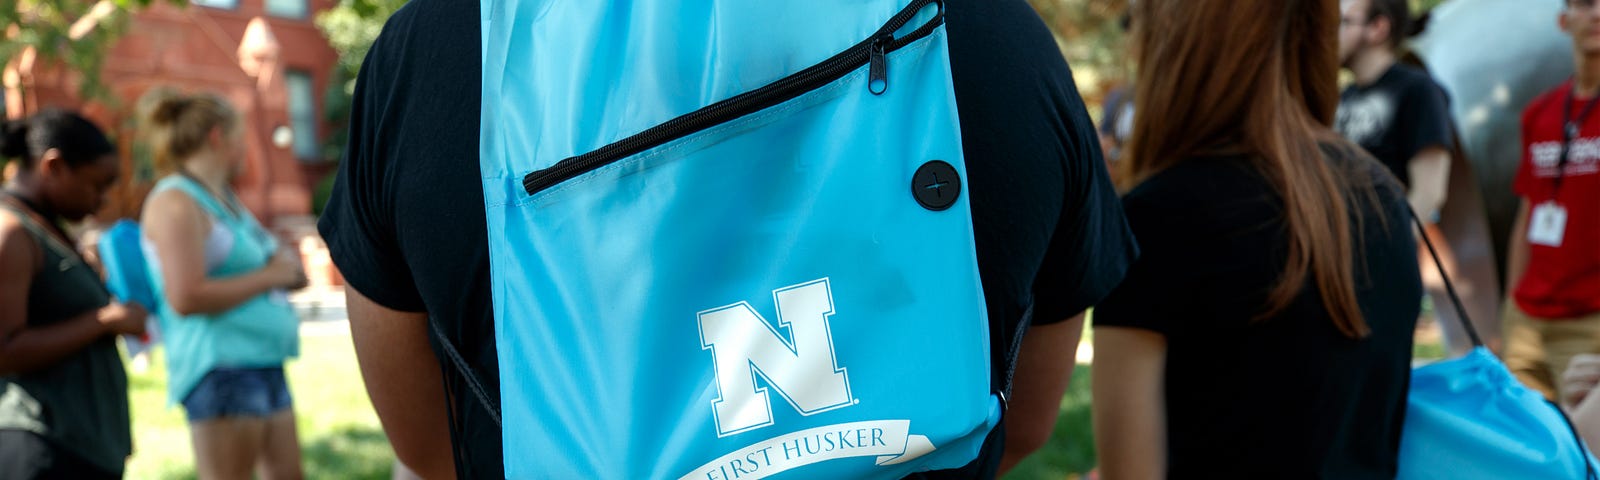 At an event for first-generation college students, they stand in a circle for discussion with “First Husker” backpacks on